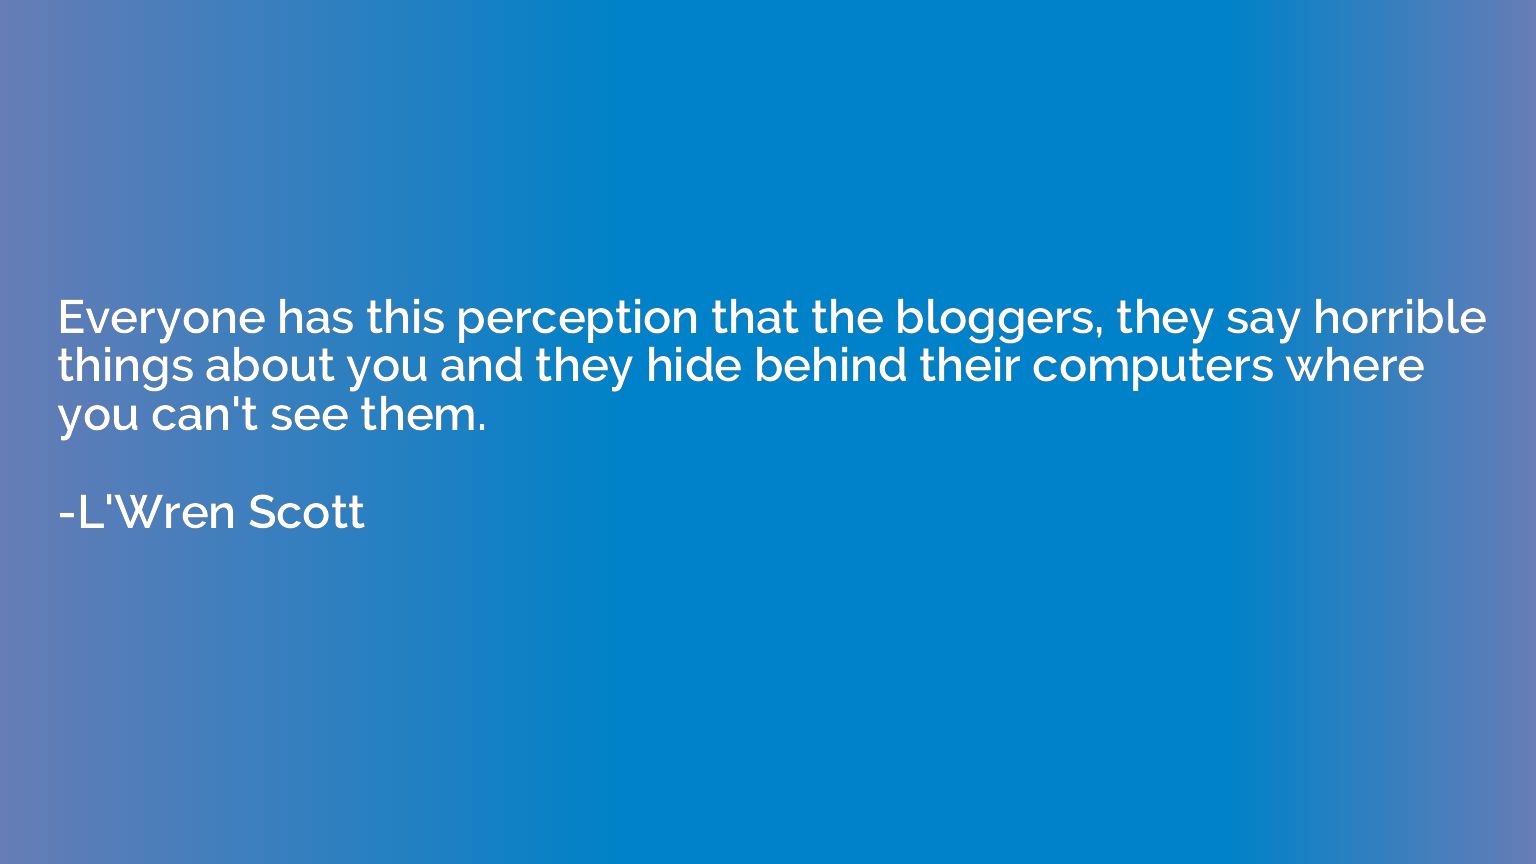 Everyone has this perception that the bloggers, they say hor